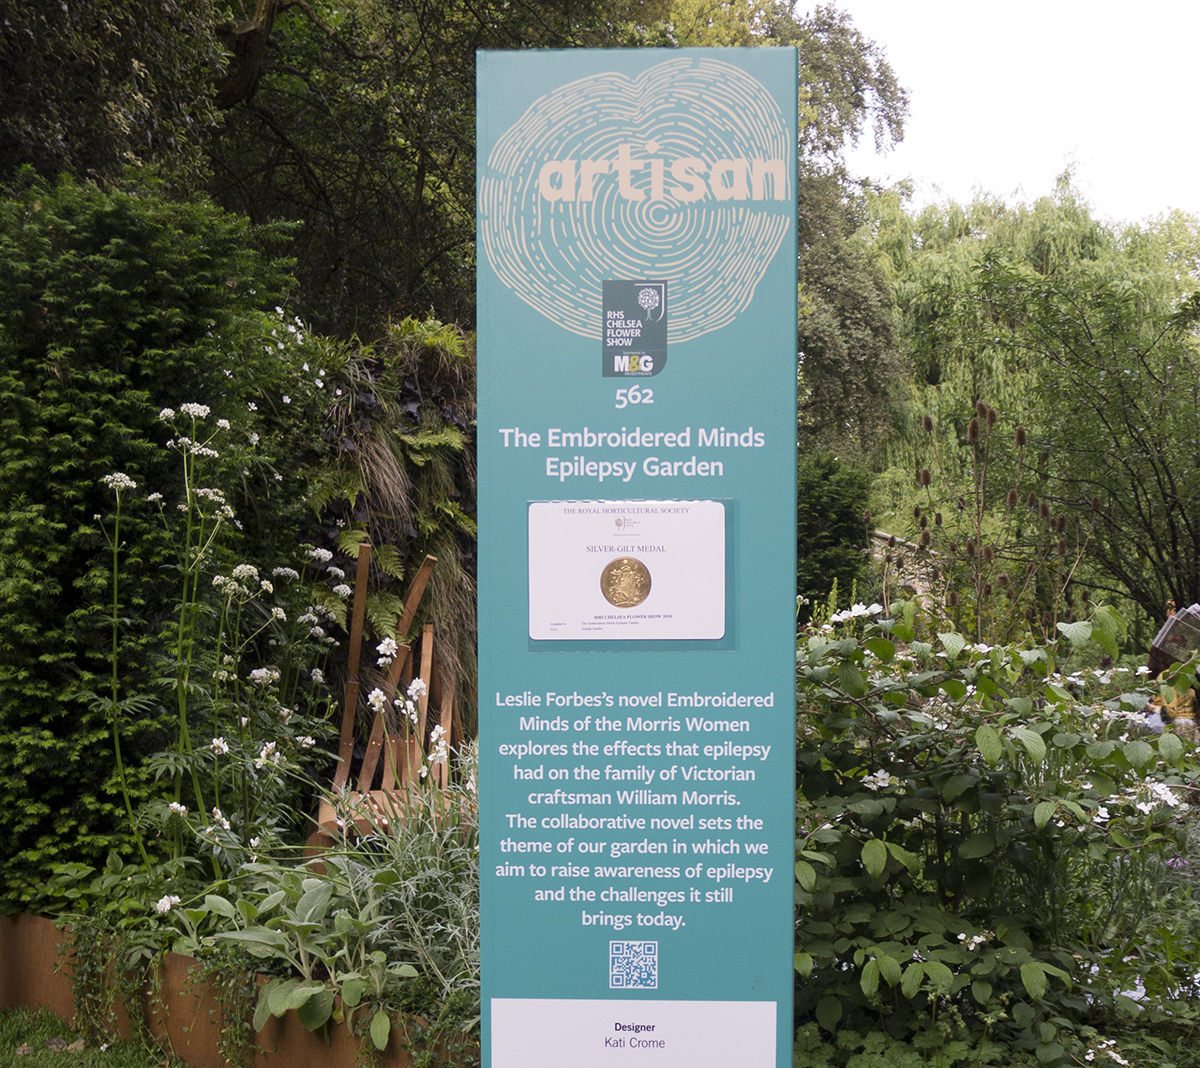 The introduction sign with our medal certificate